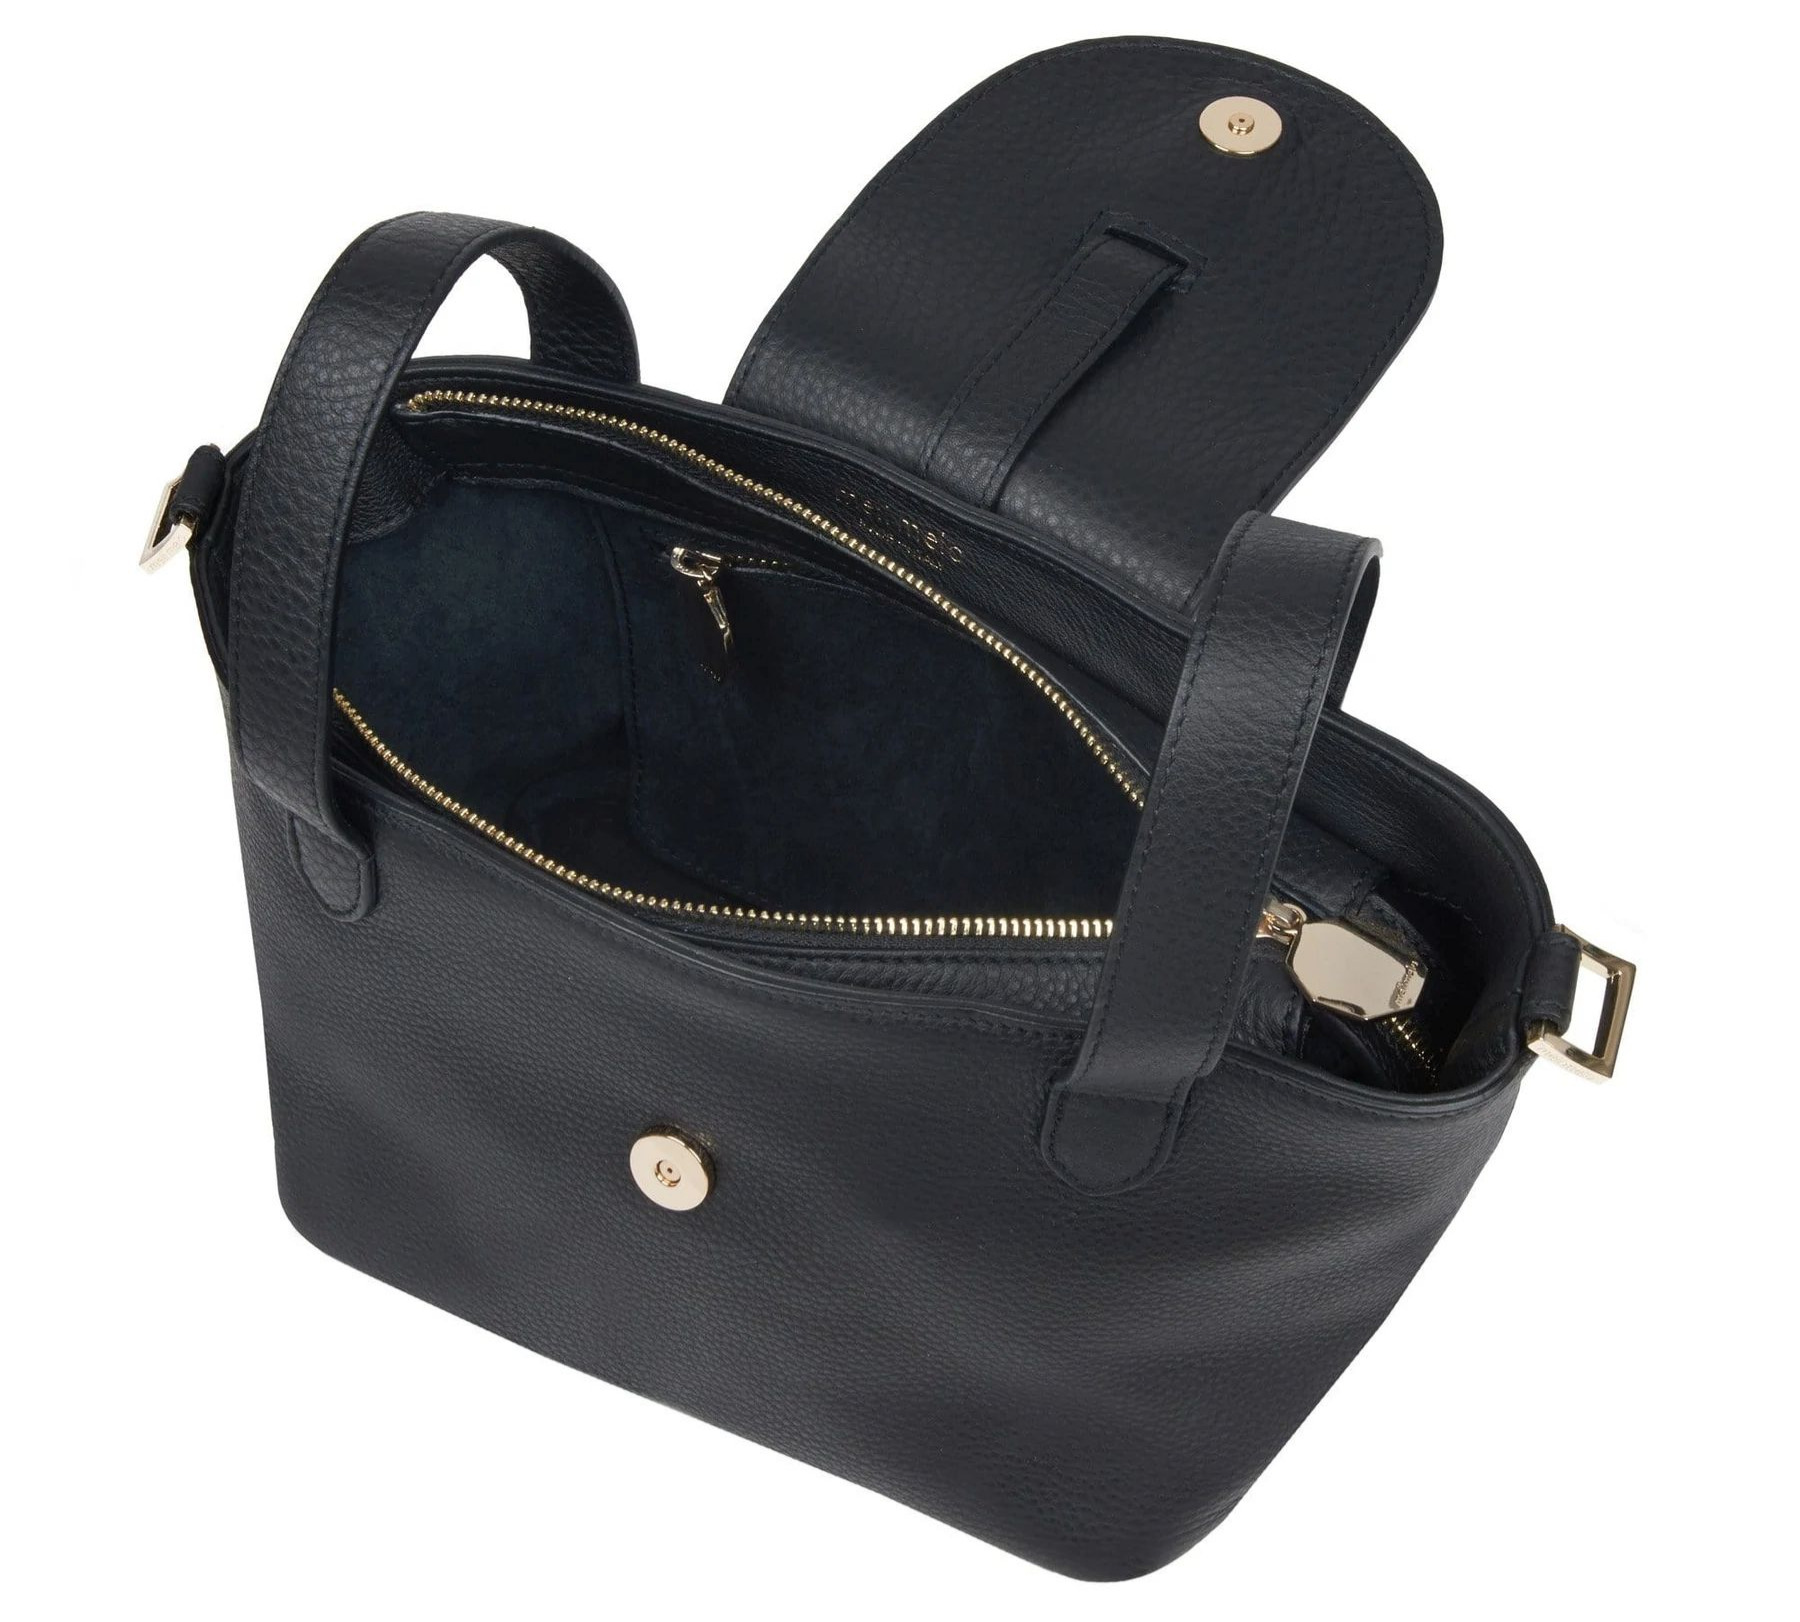 Thela Black Leather Tote Bag for Women